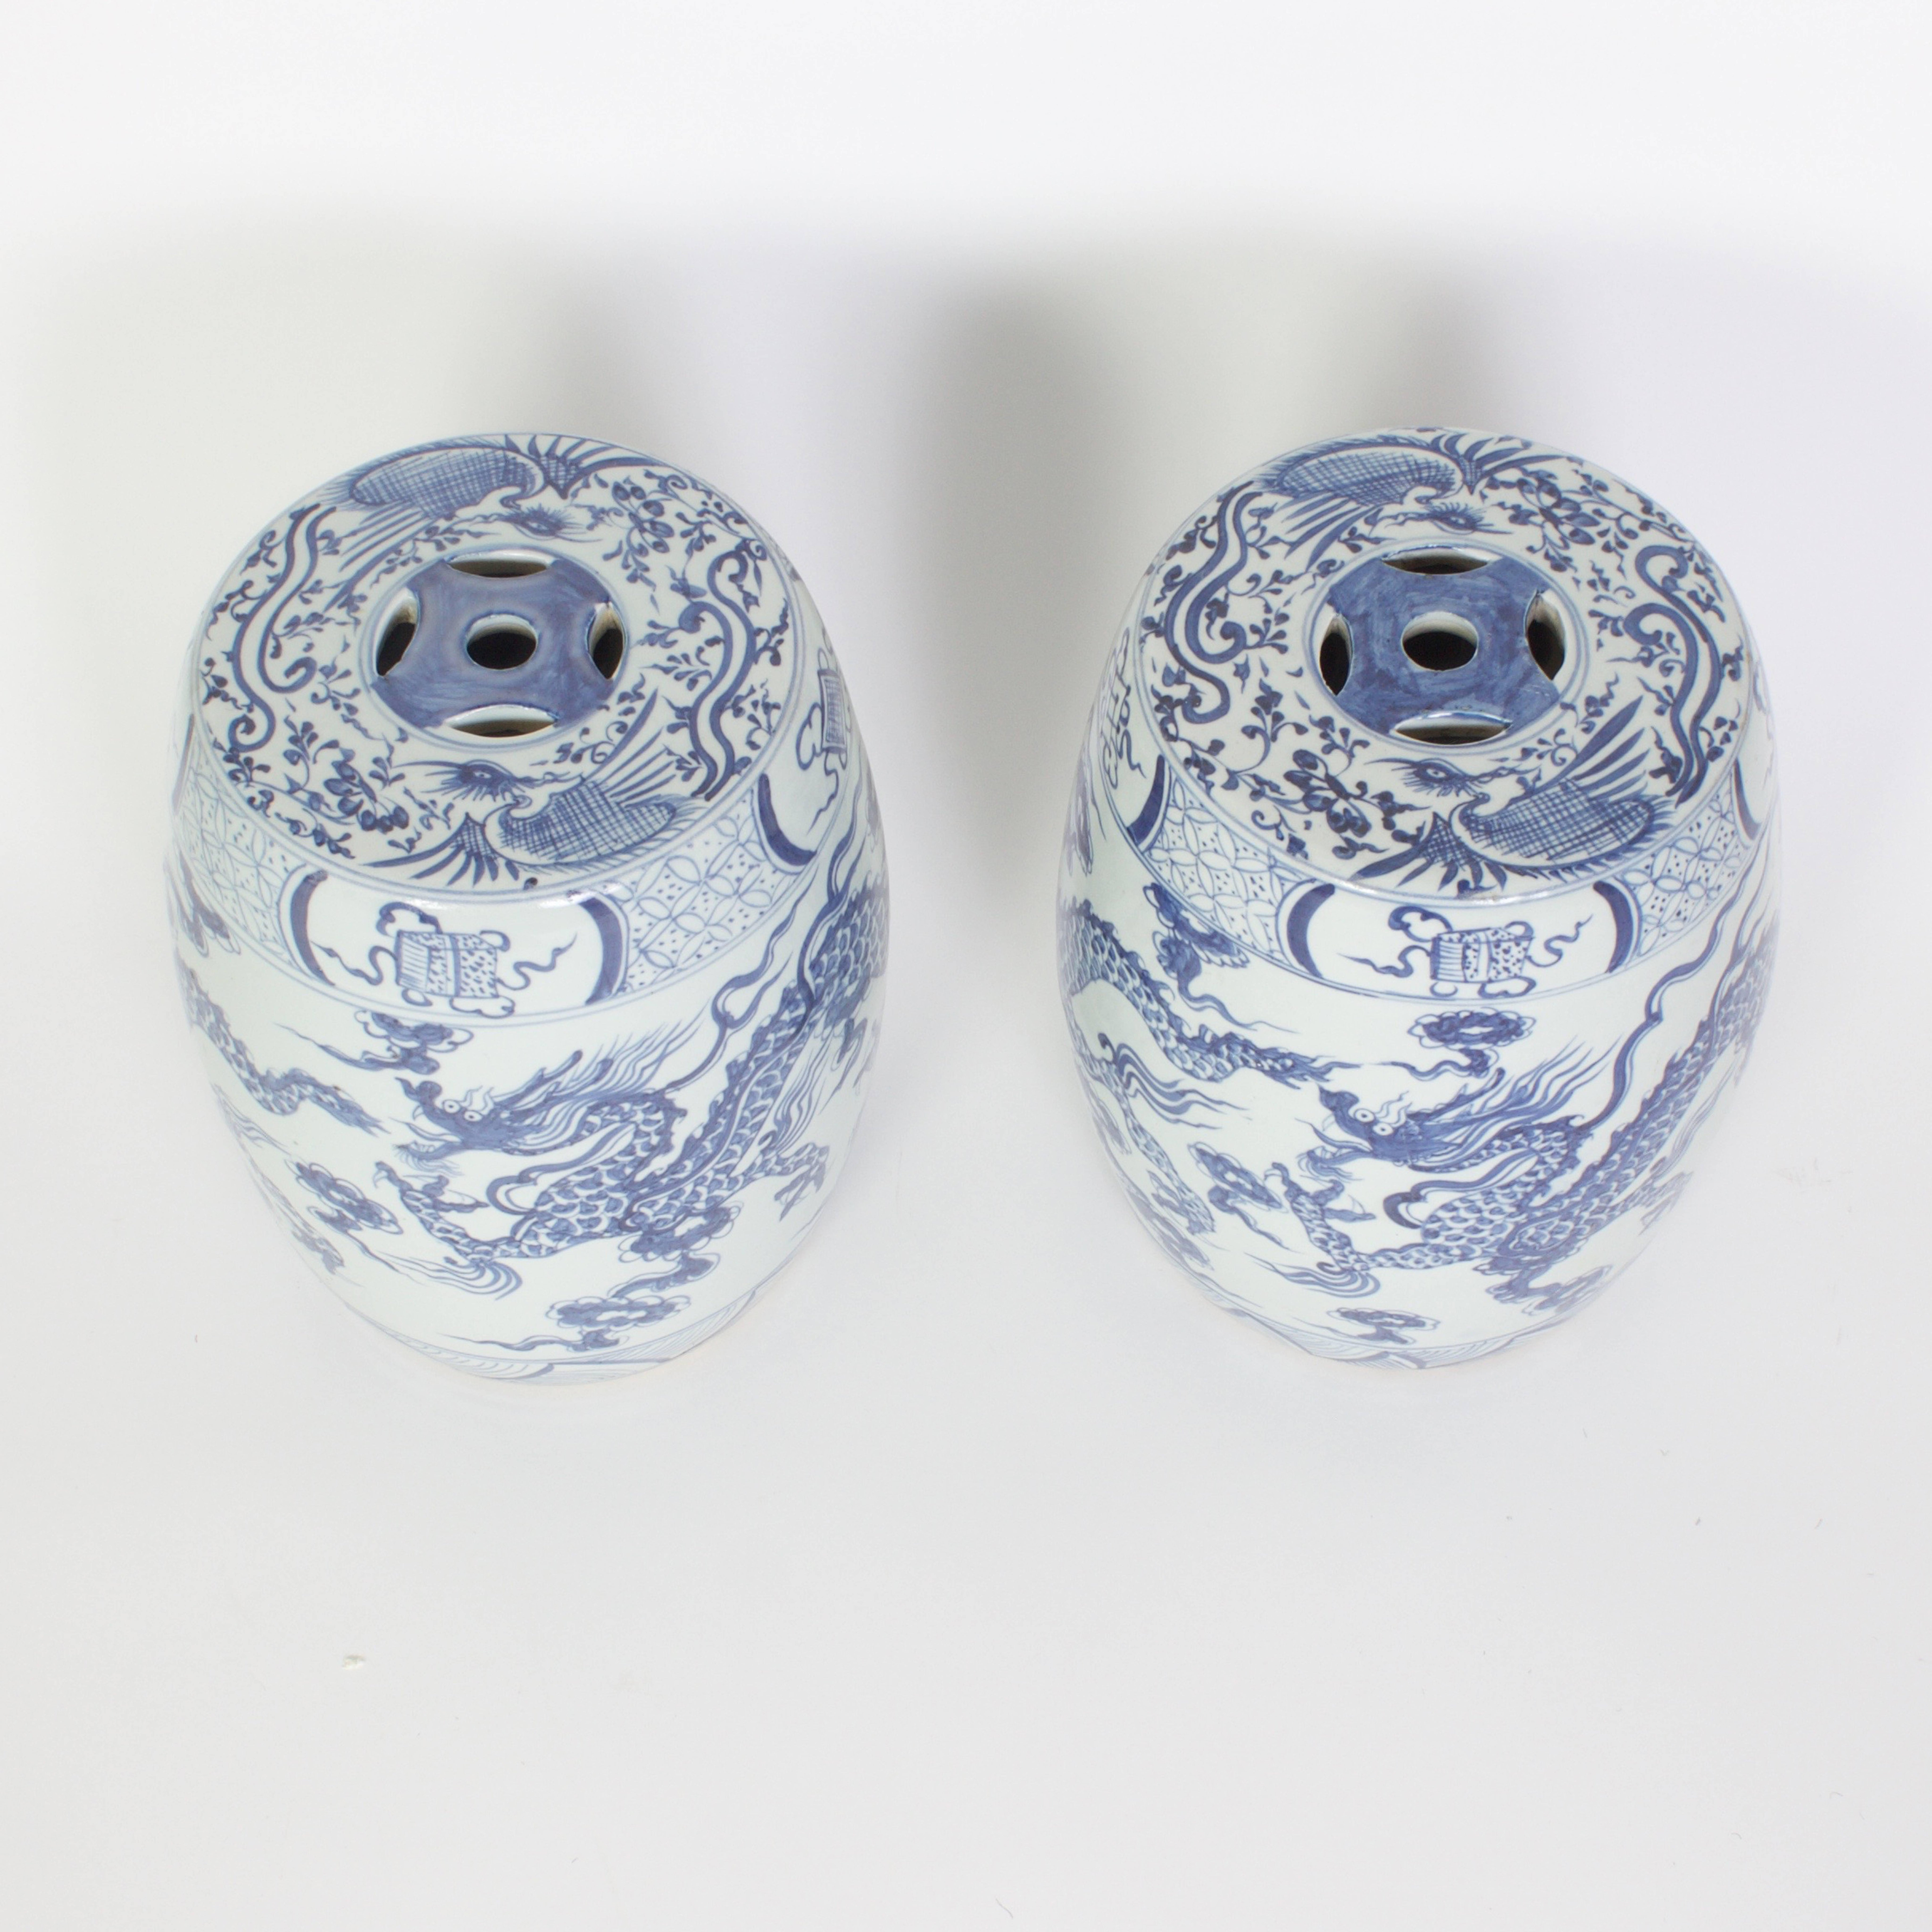 Pair of Chinese Export Lidded Jars, Two Miniature Garden Stools and a Bowl 2